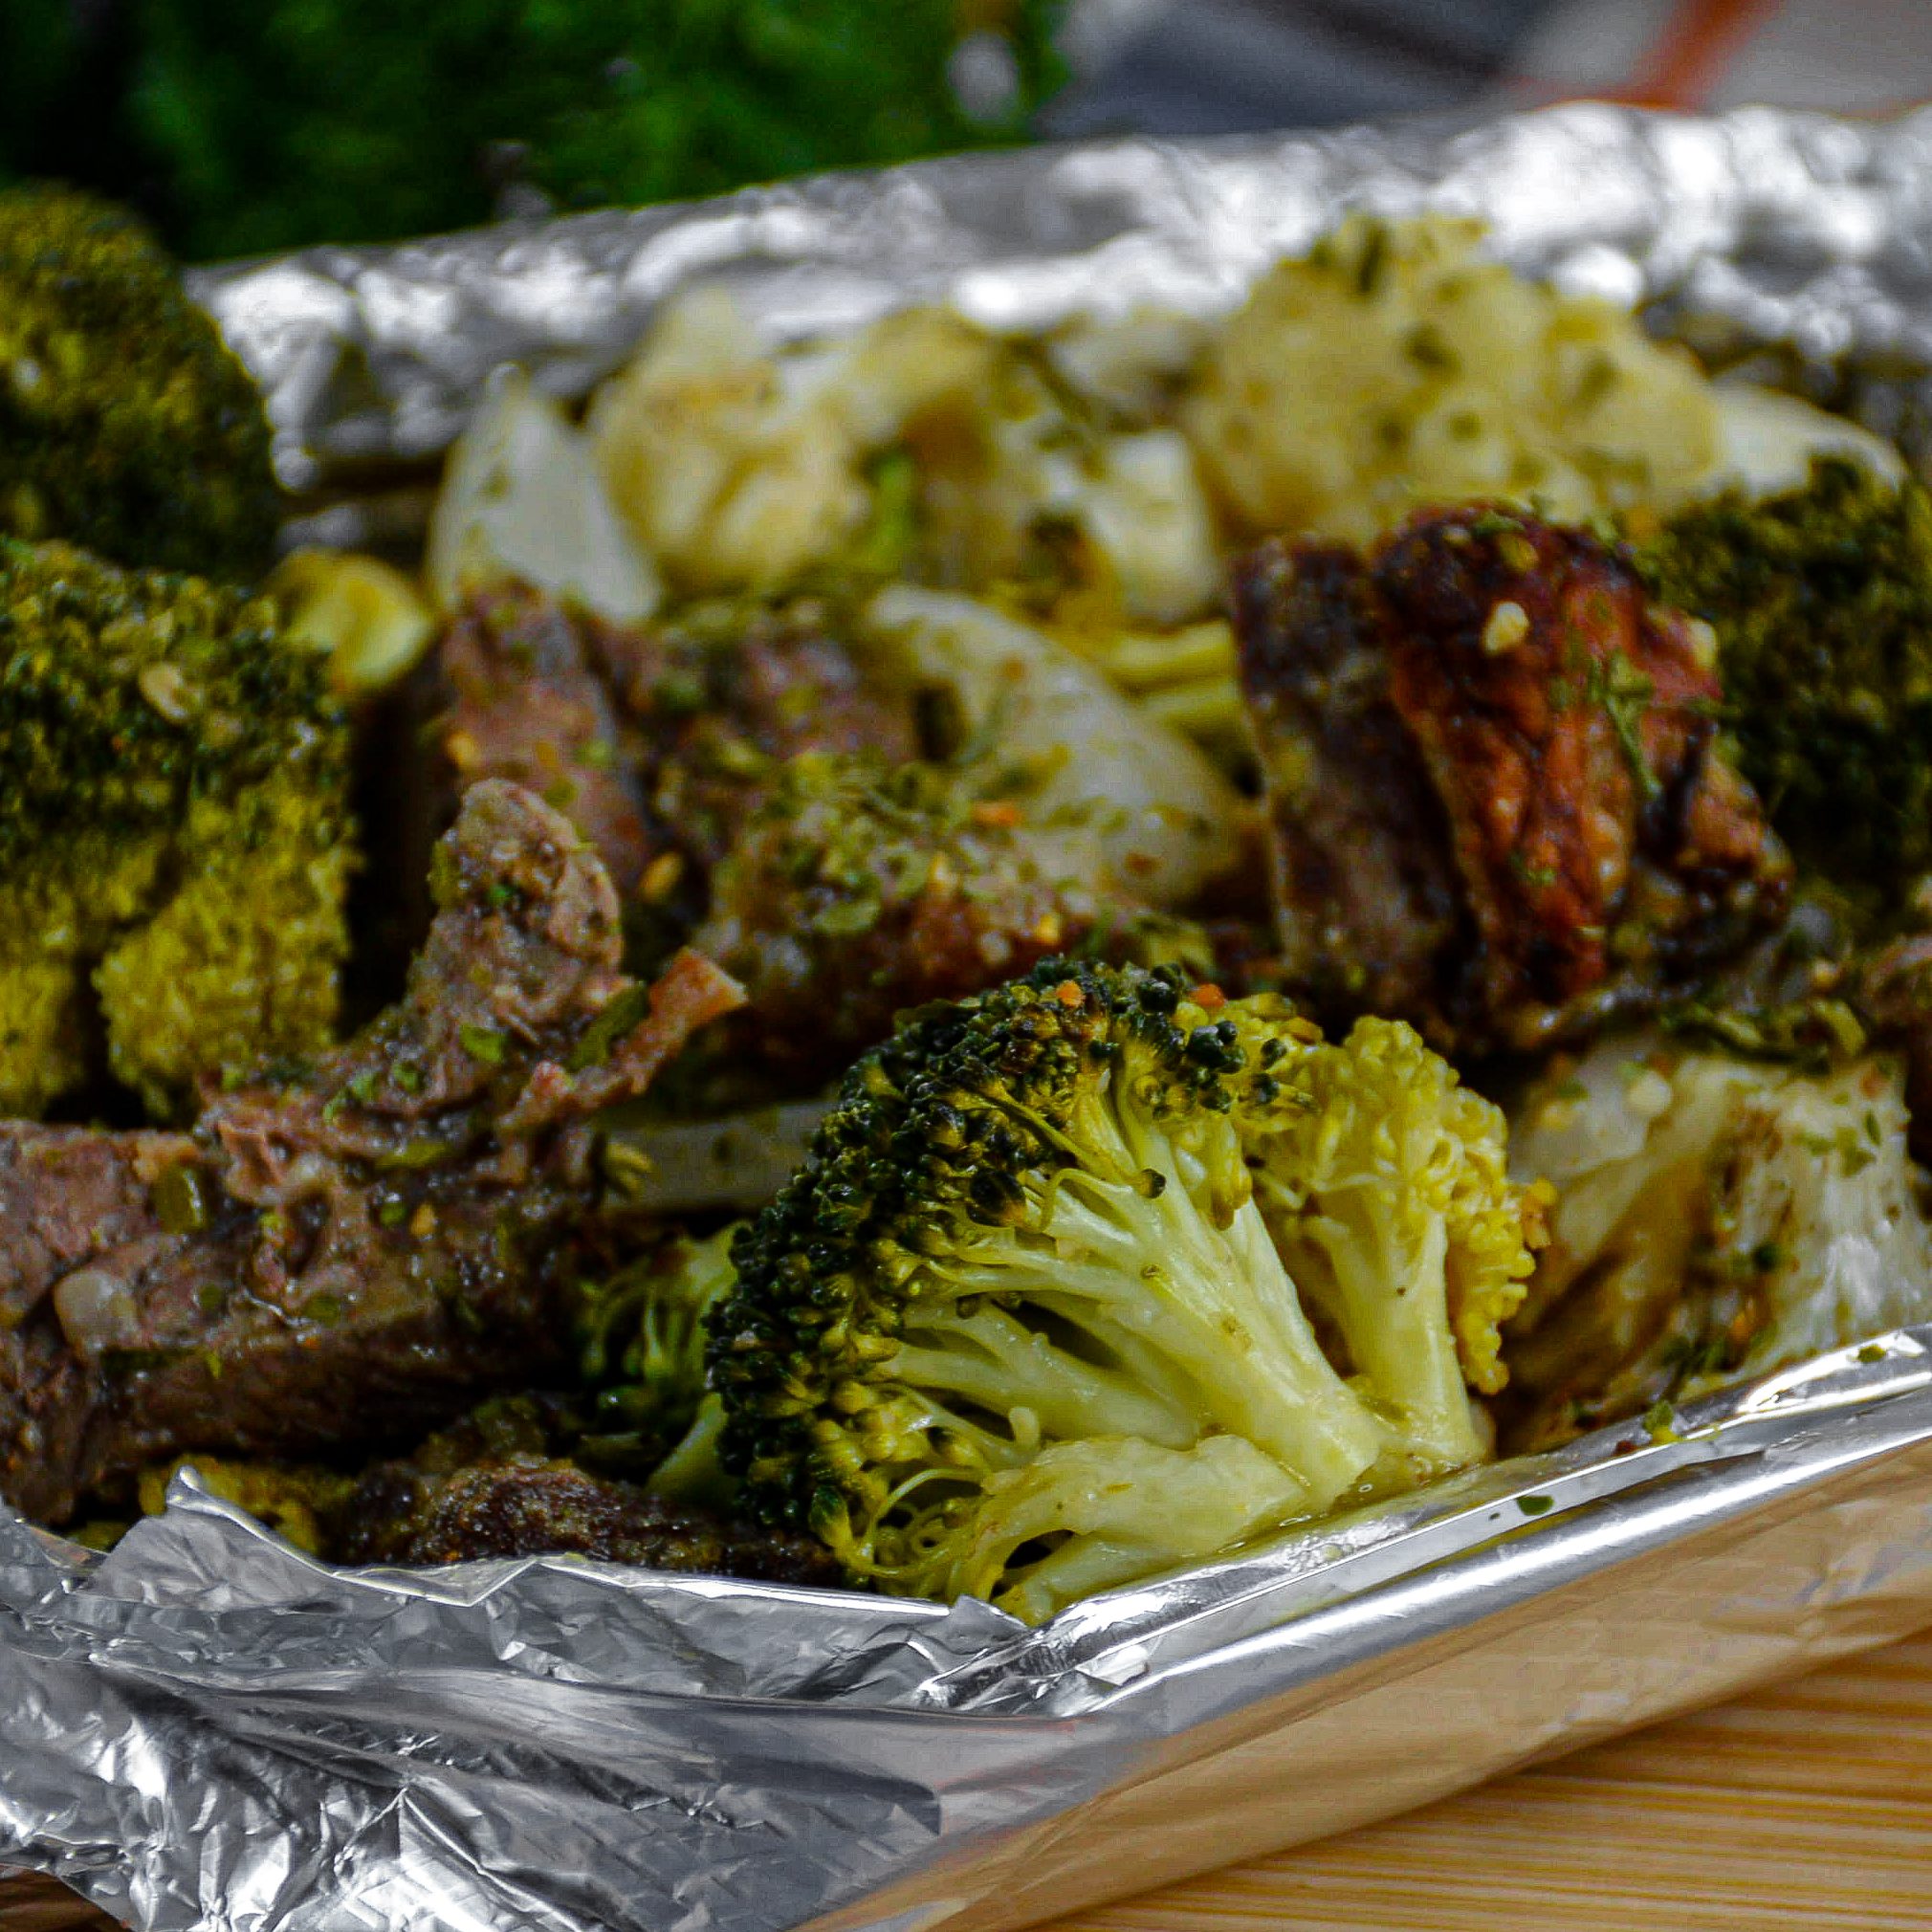 Carefully remove one from the oven to make sure the meat and vegetables are cooked.